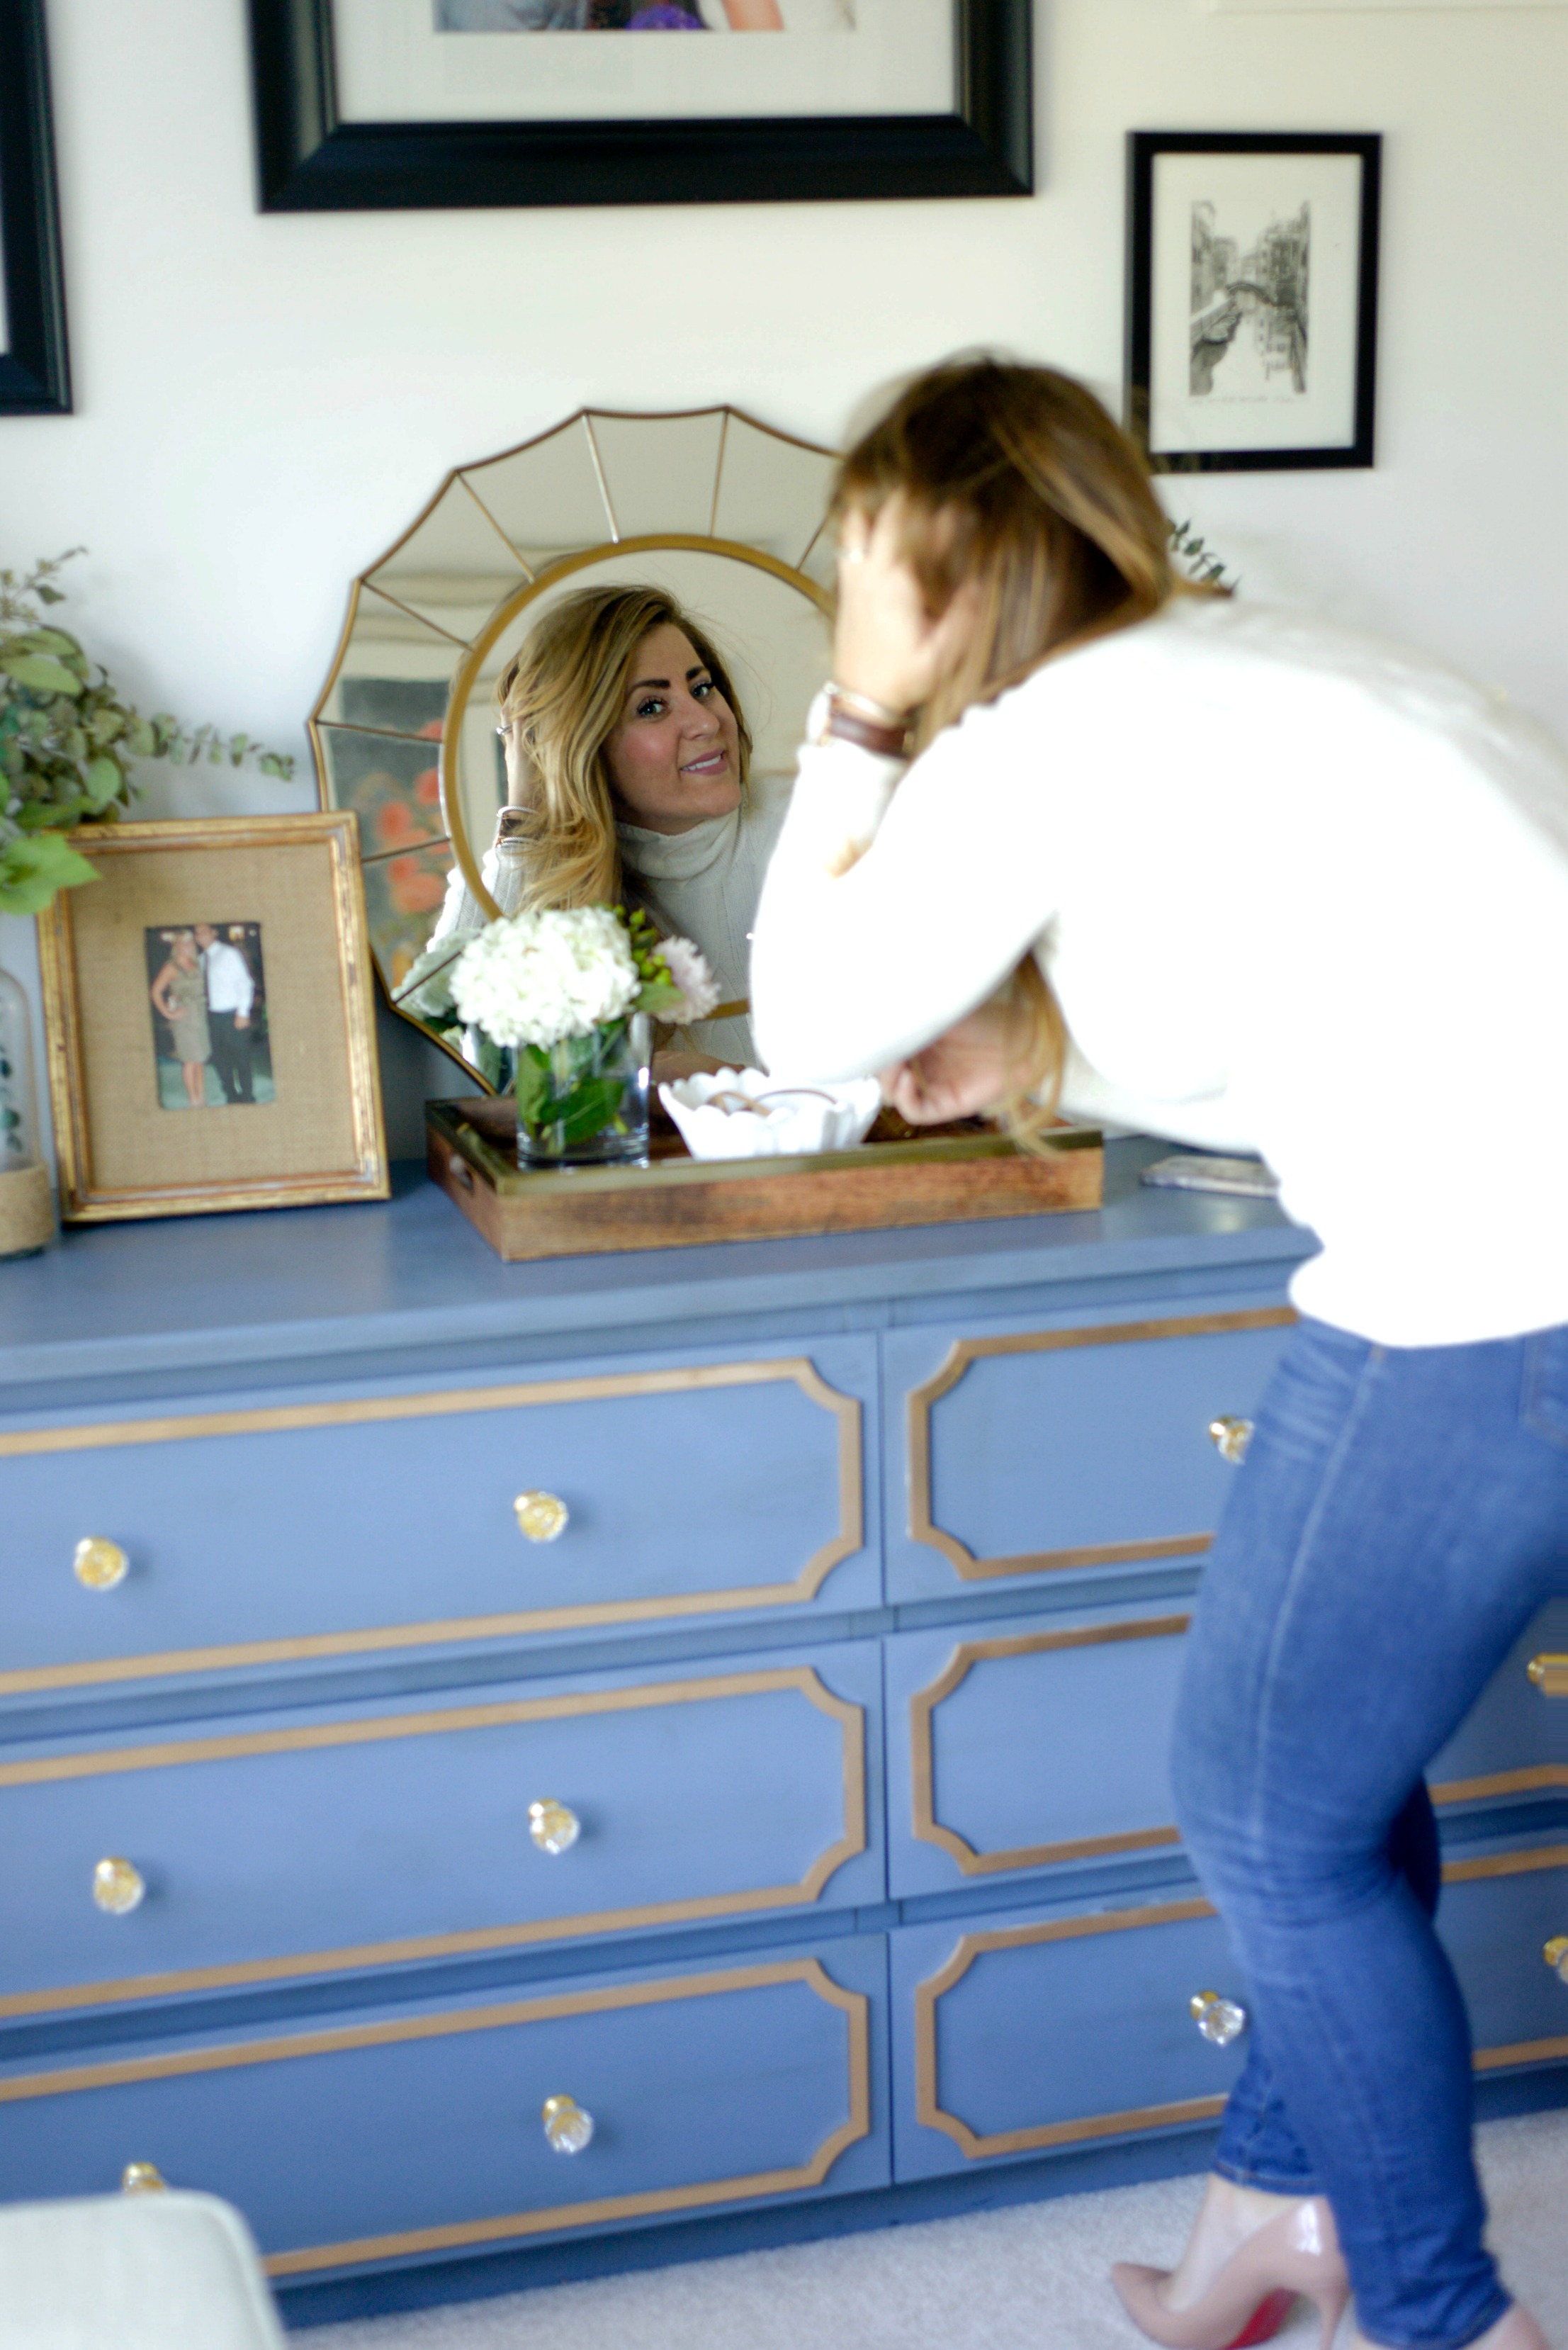 Ikea Dresser Makeover by lifestyle blogger Amy of Coffee Beans and Bobby Pins